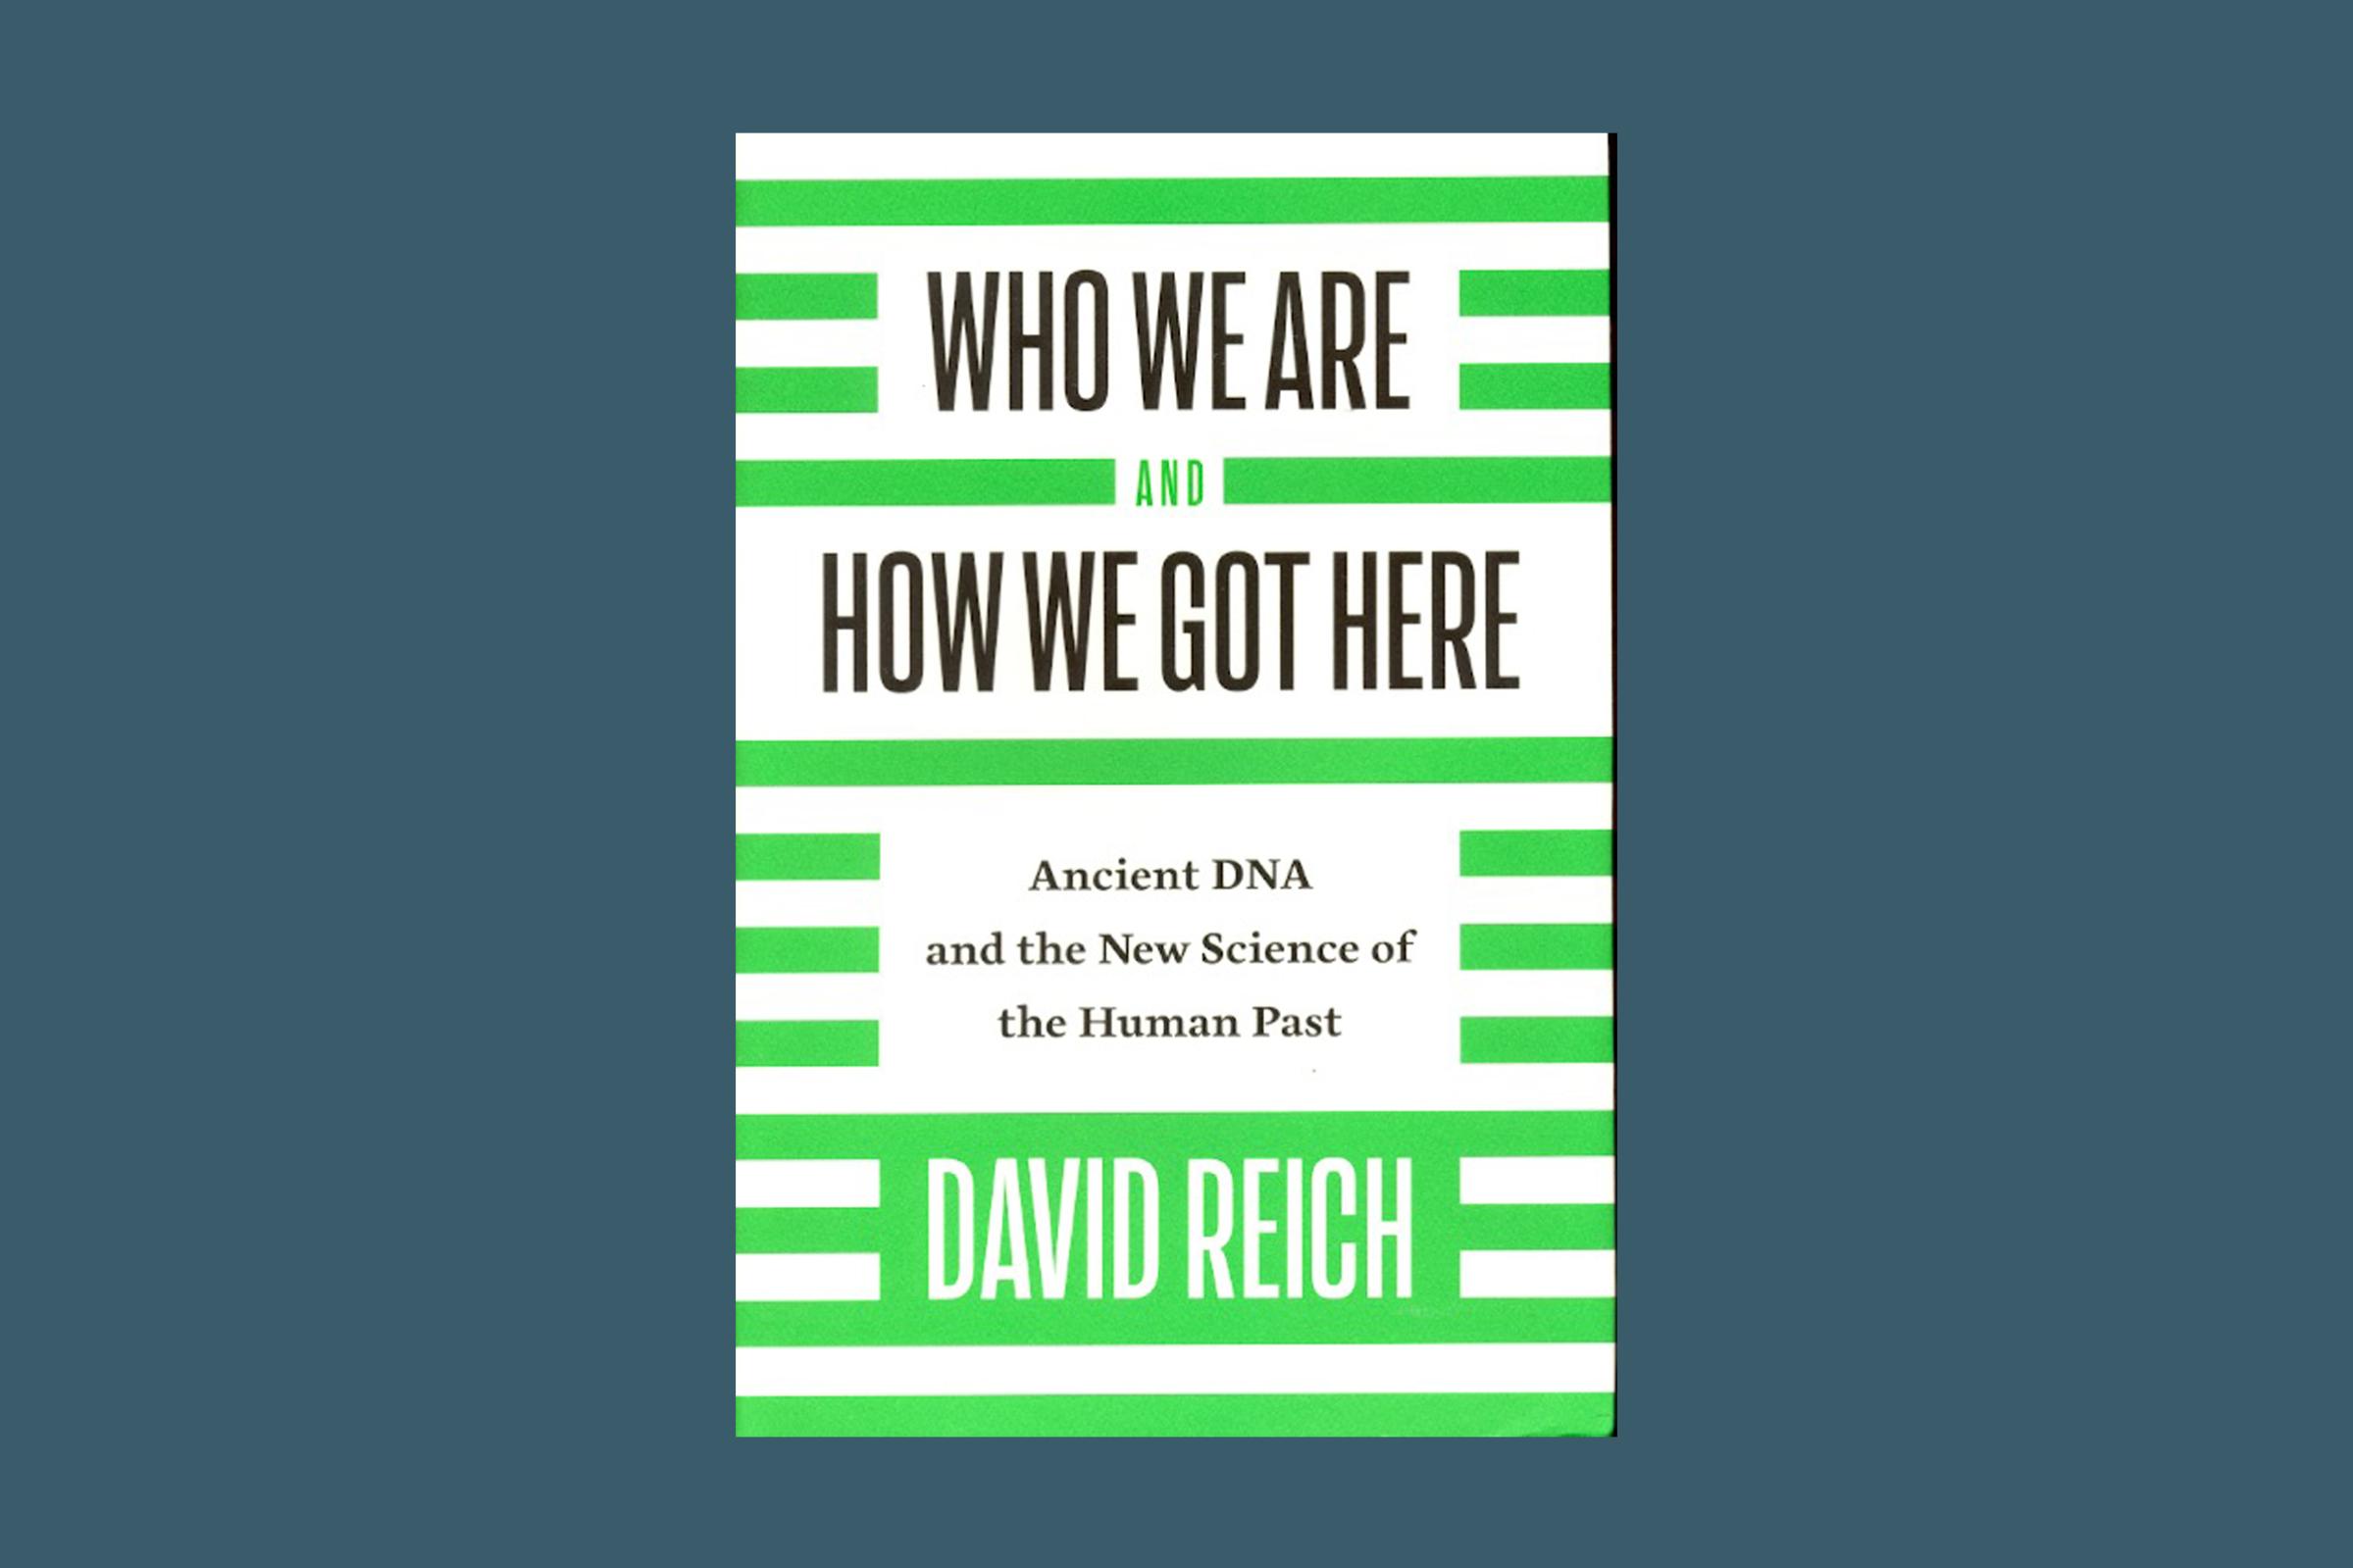 Who We Are and How We Got Here, David Reich